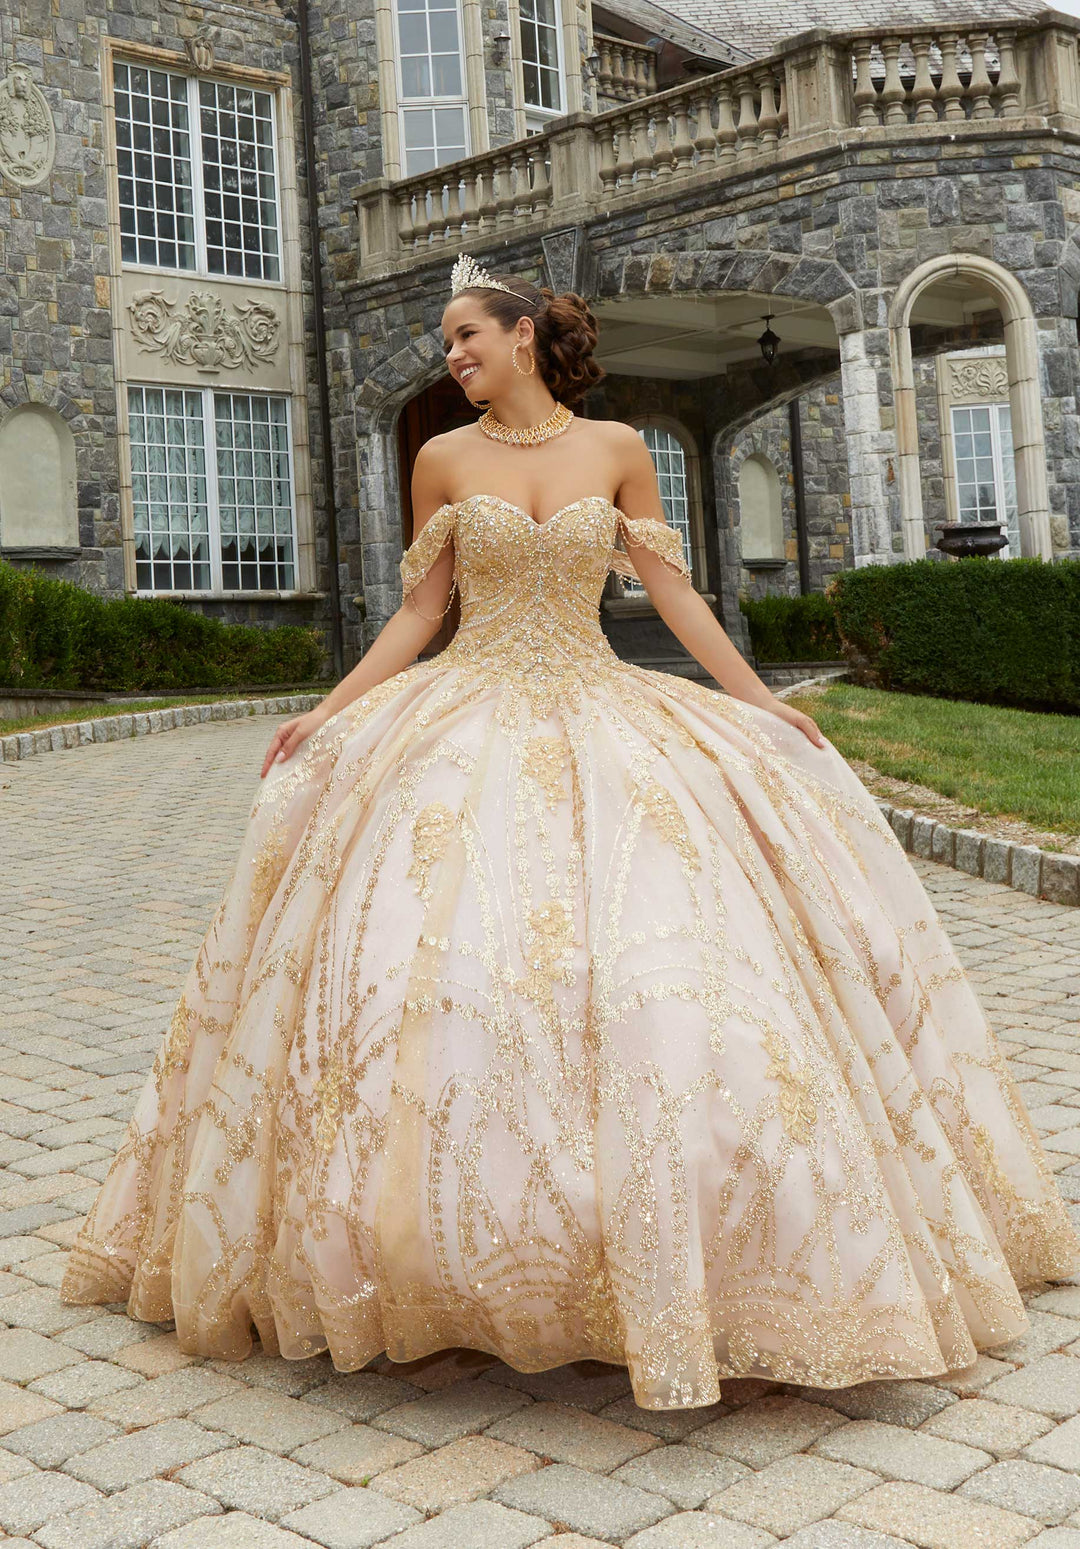 MORILEE #34083 BLUSH/ROSE GOLD Patterned Glitter Quinceañera Dress with Chandelier Beading